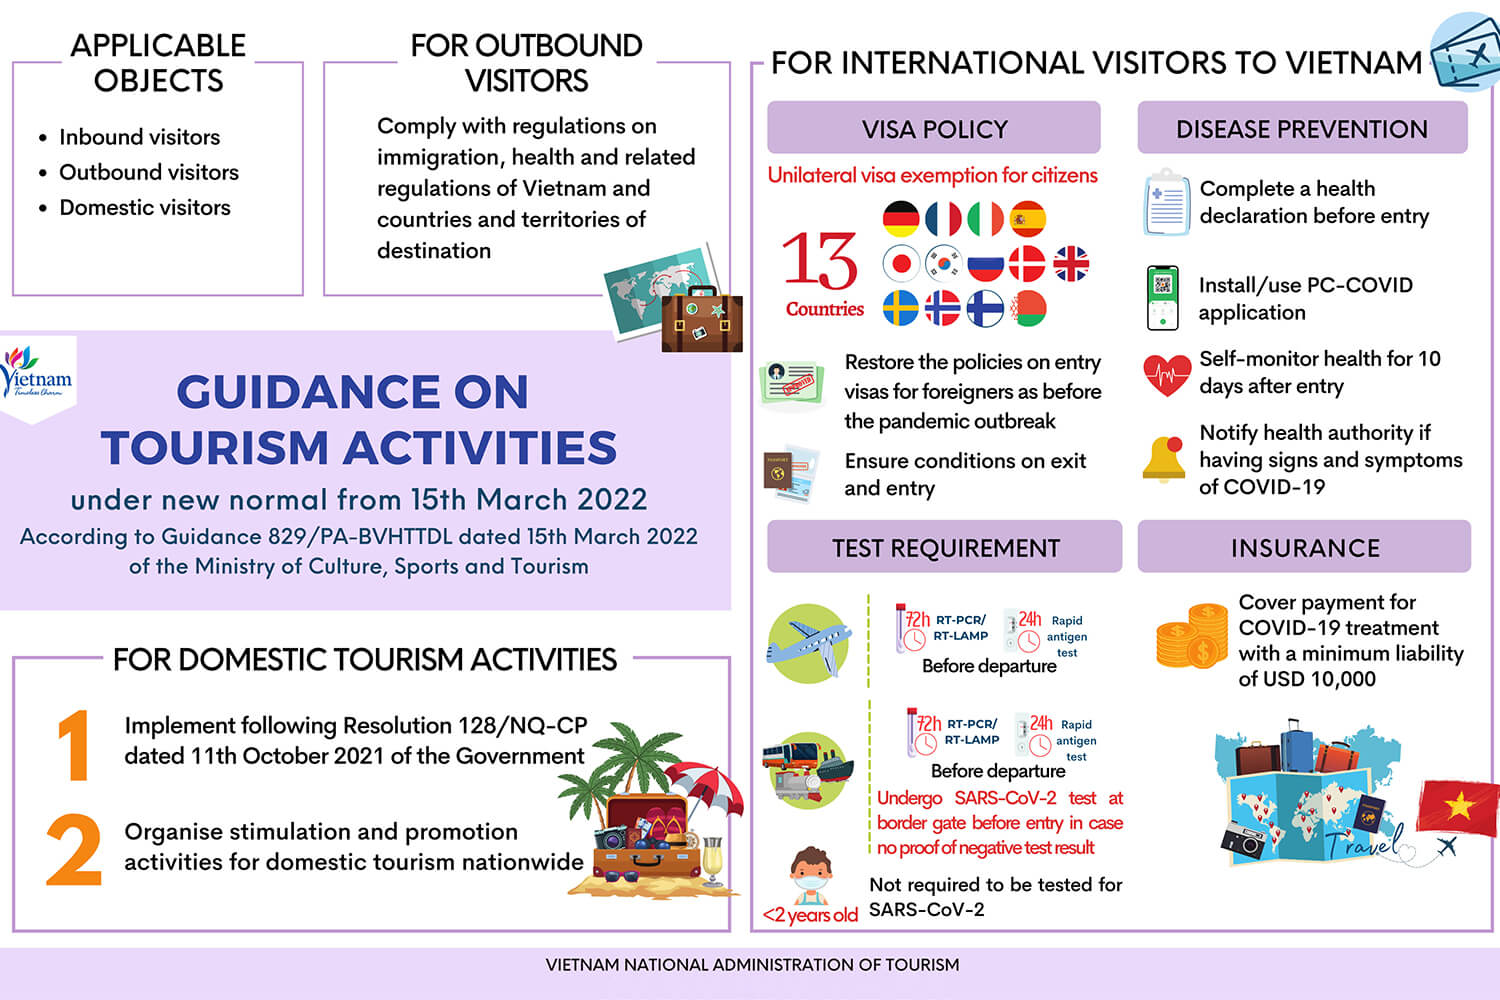 Guidance on Tourism Activities under the New Normal from March 15